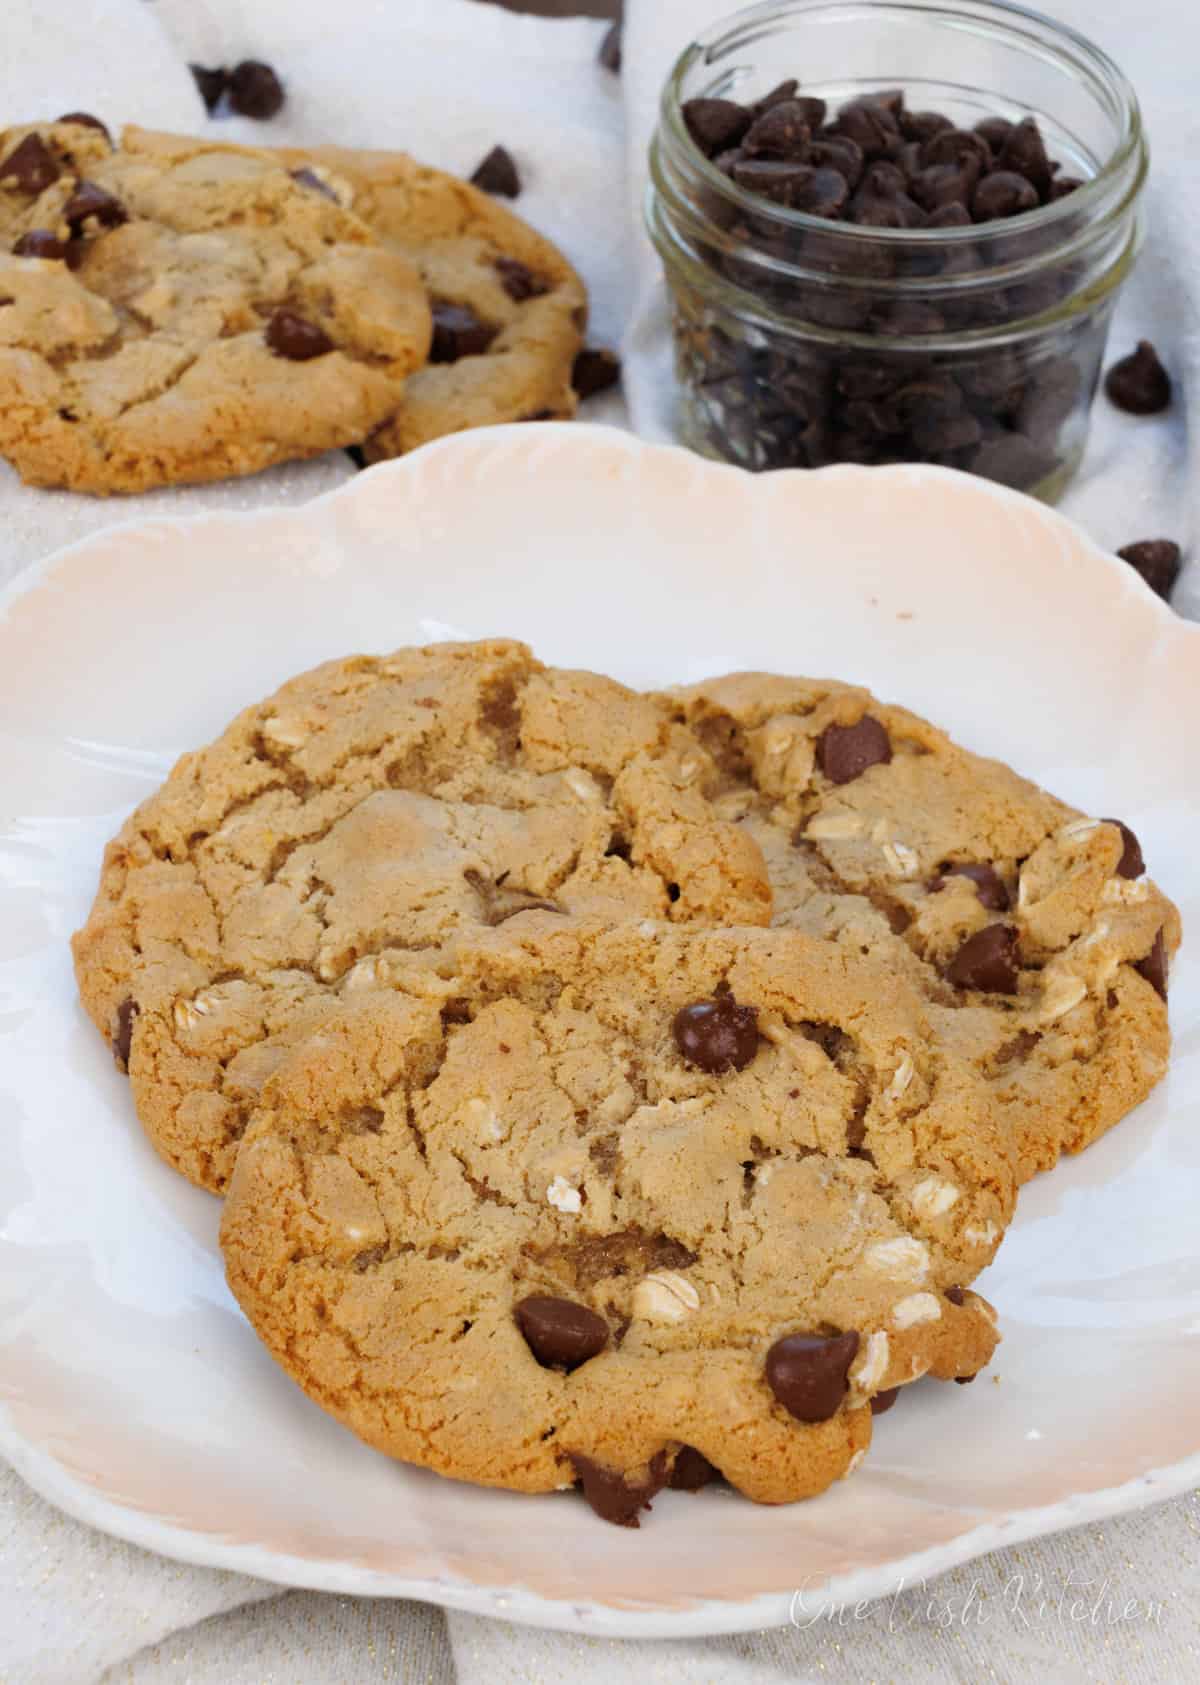 three oatmeal chocolate chip cookies on a plate next to a jar of chocolate chips and a white napkin